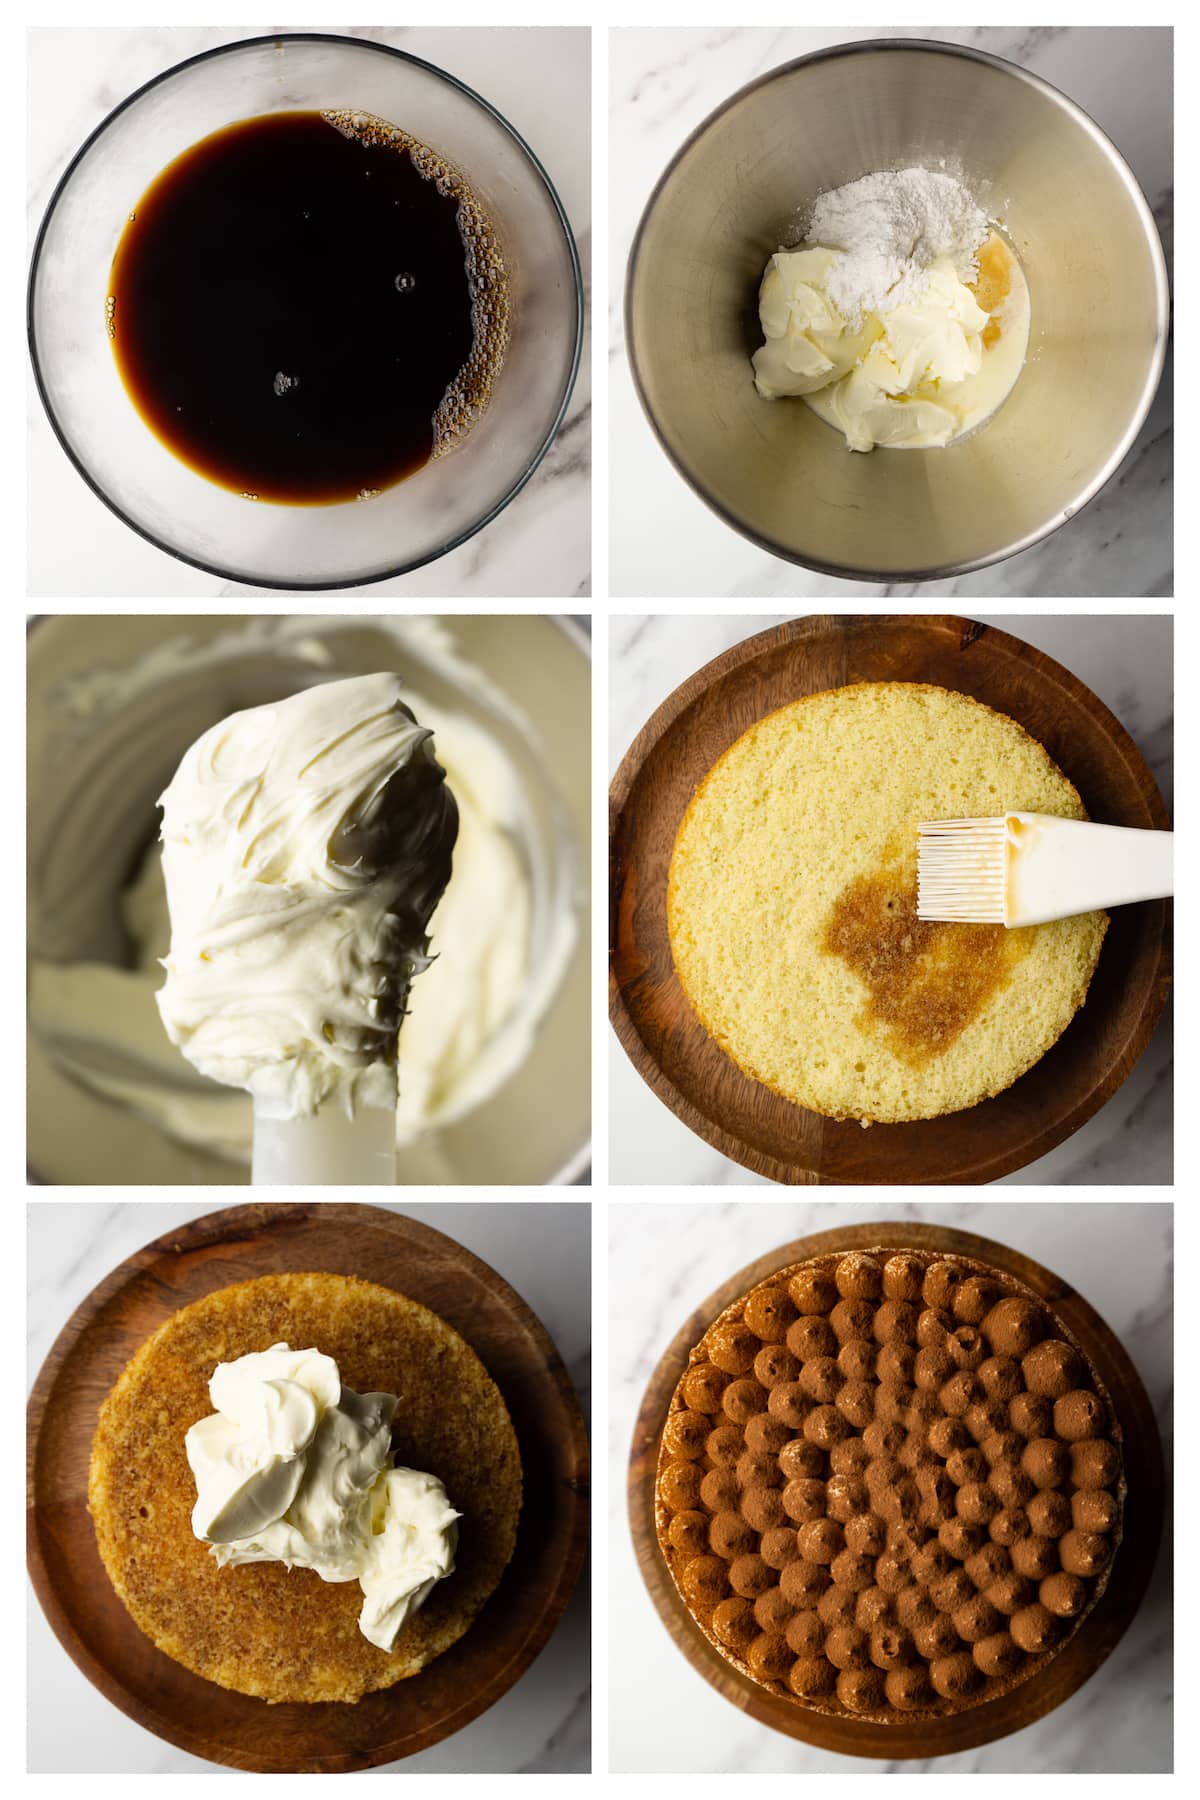 The collage image shows six steps of assembling a tiramisu cake with cream cheese frosting and coffee syrup and decorating it with cocoa powder.